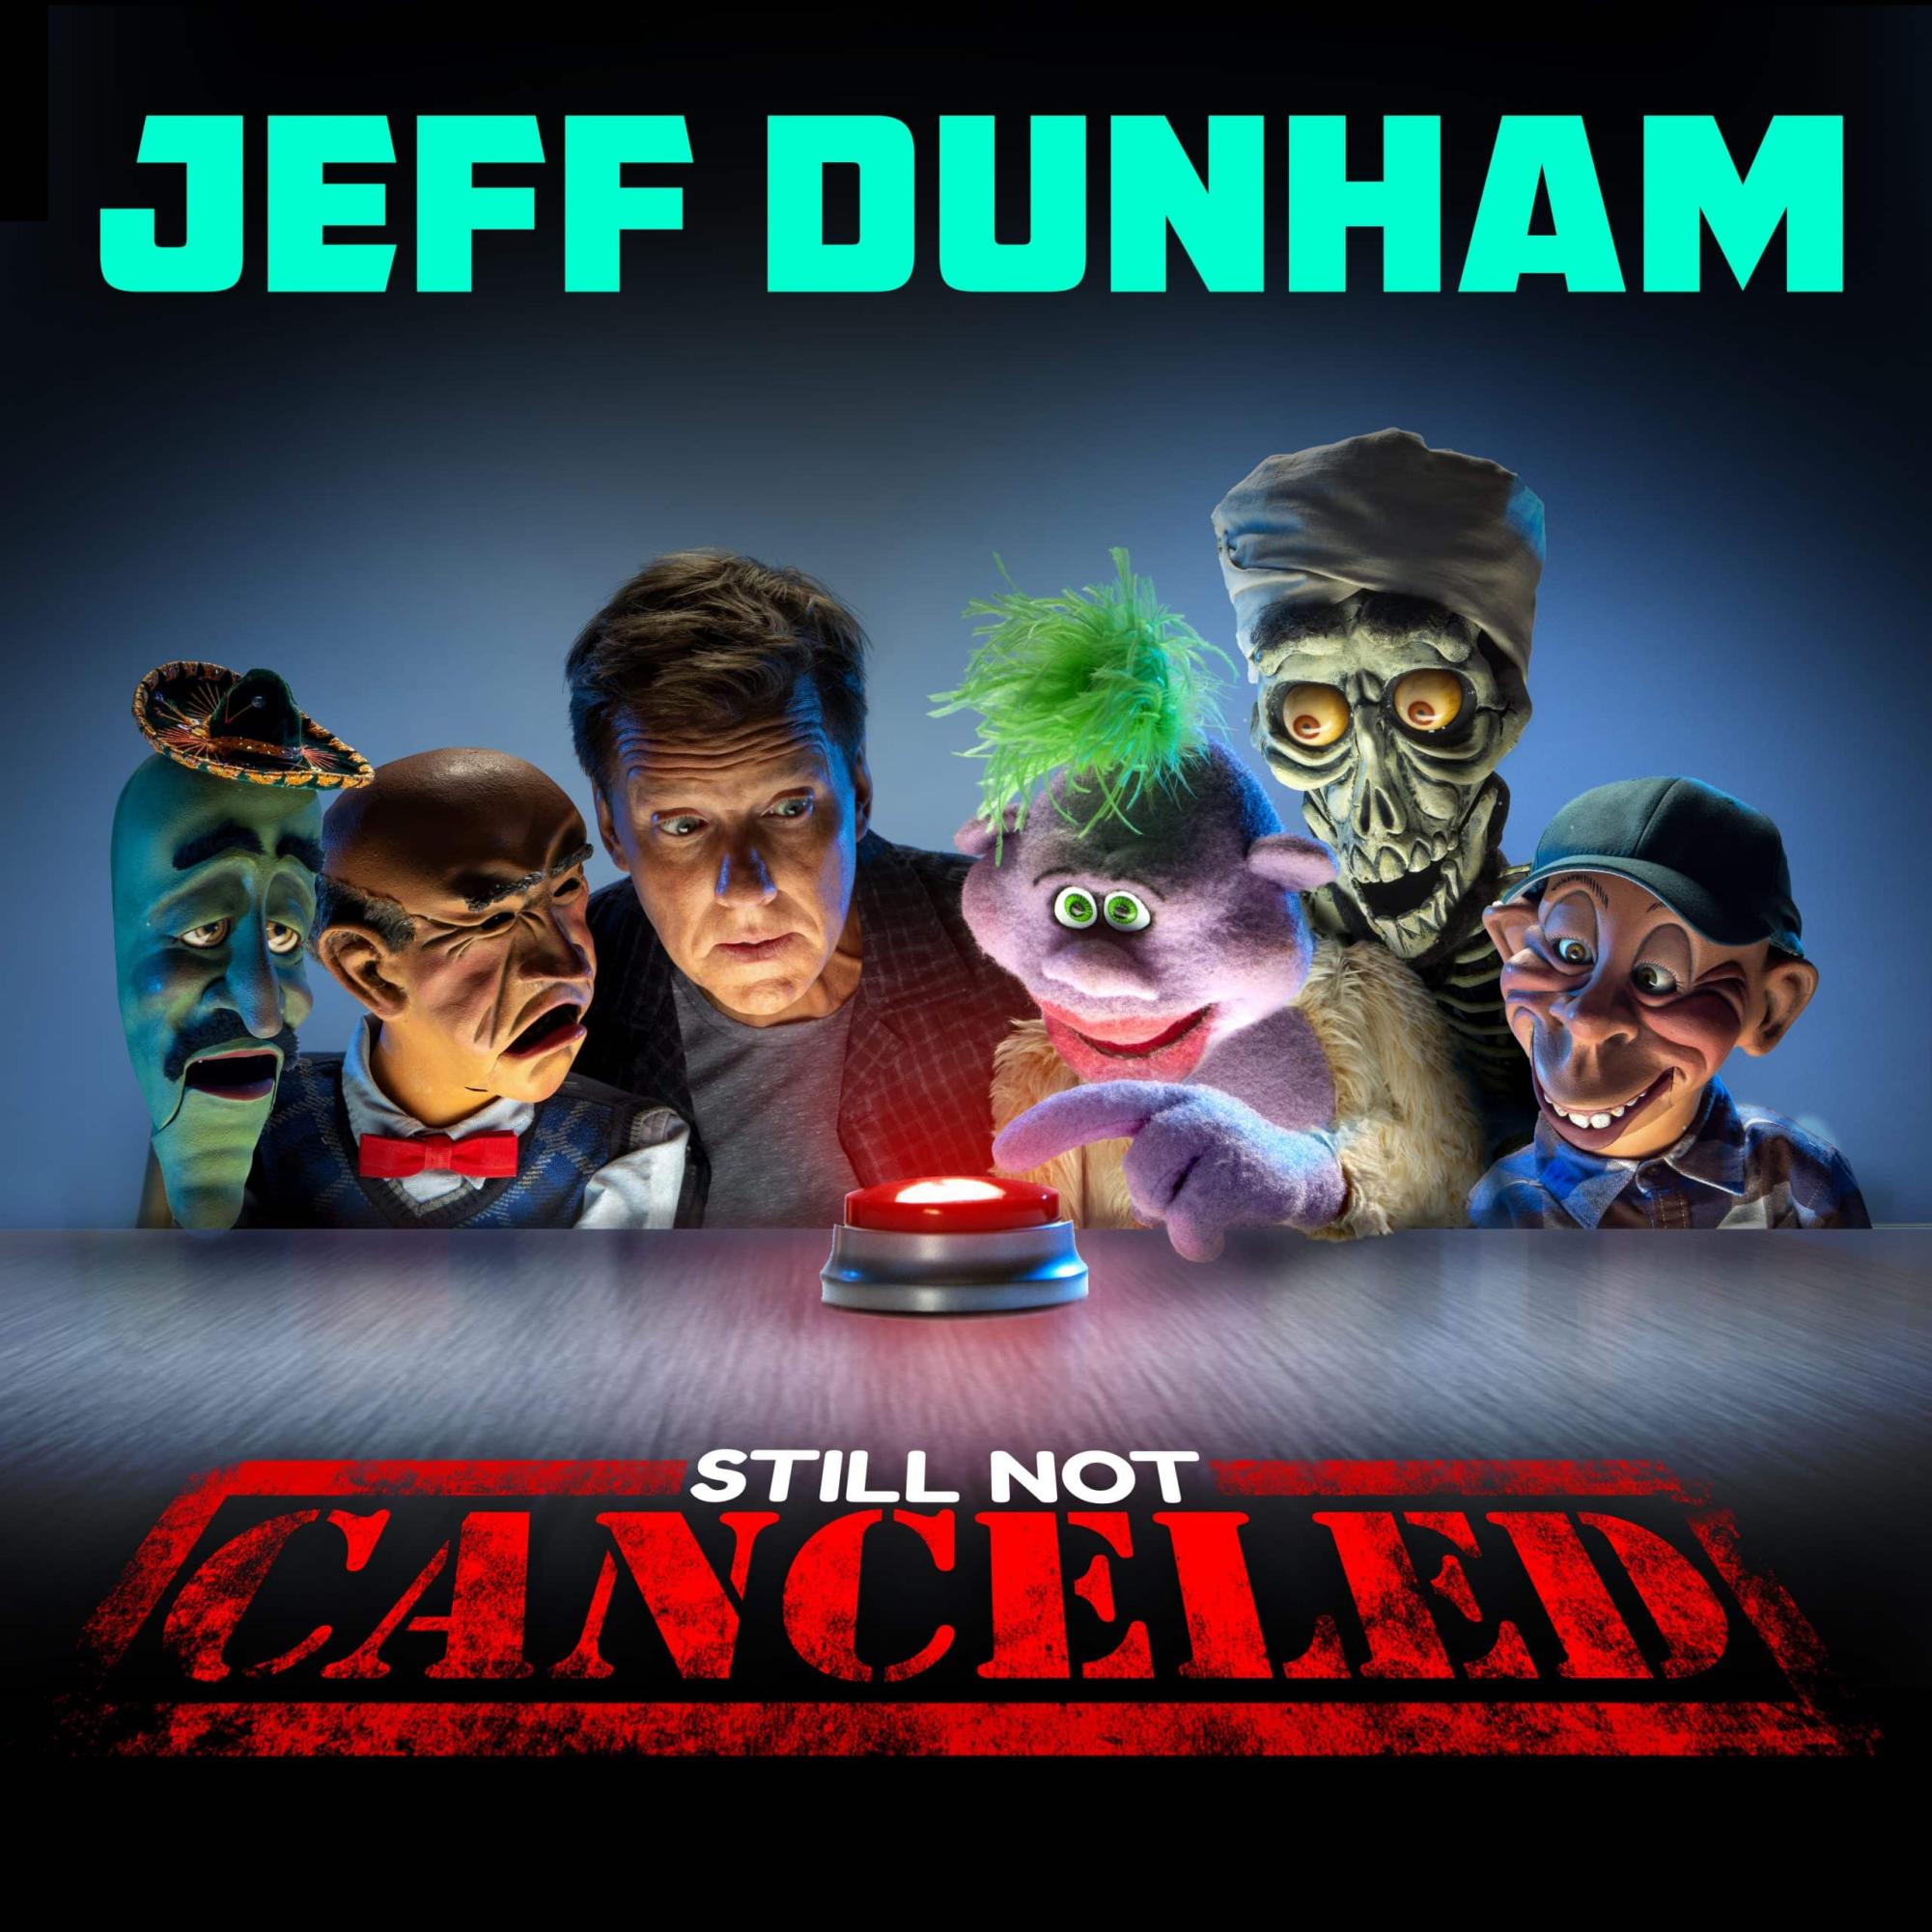 Image found at https://secure.jeffdunham.com/product/still-not-cancelled-tour-tickets/ 